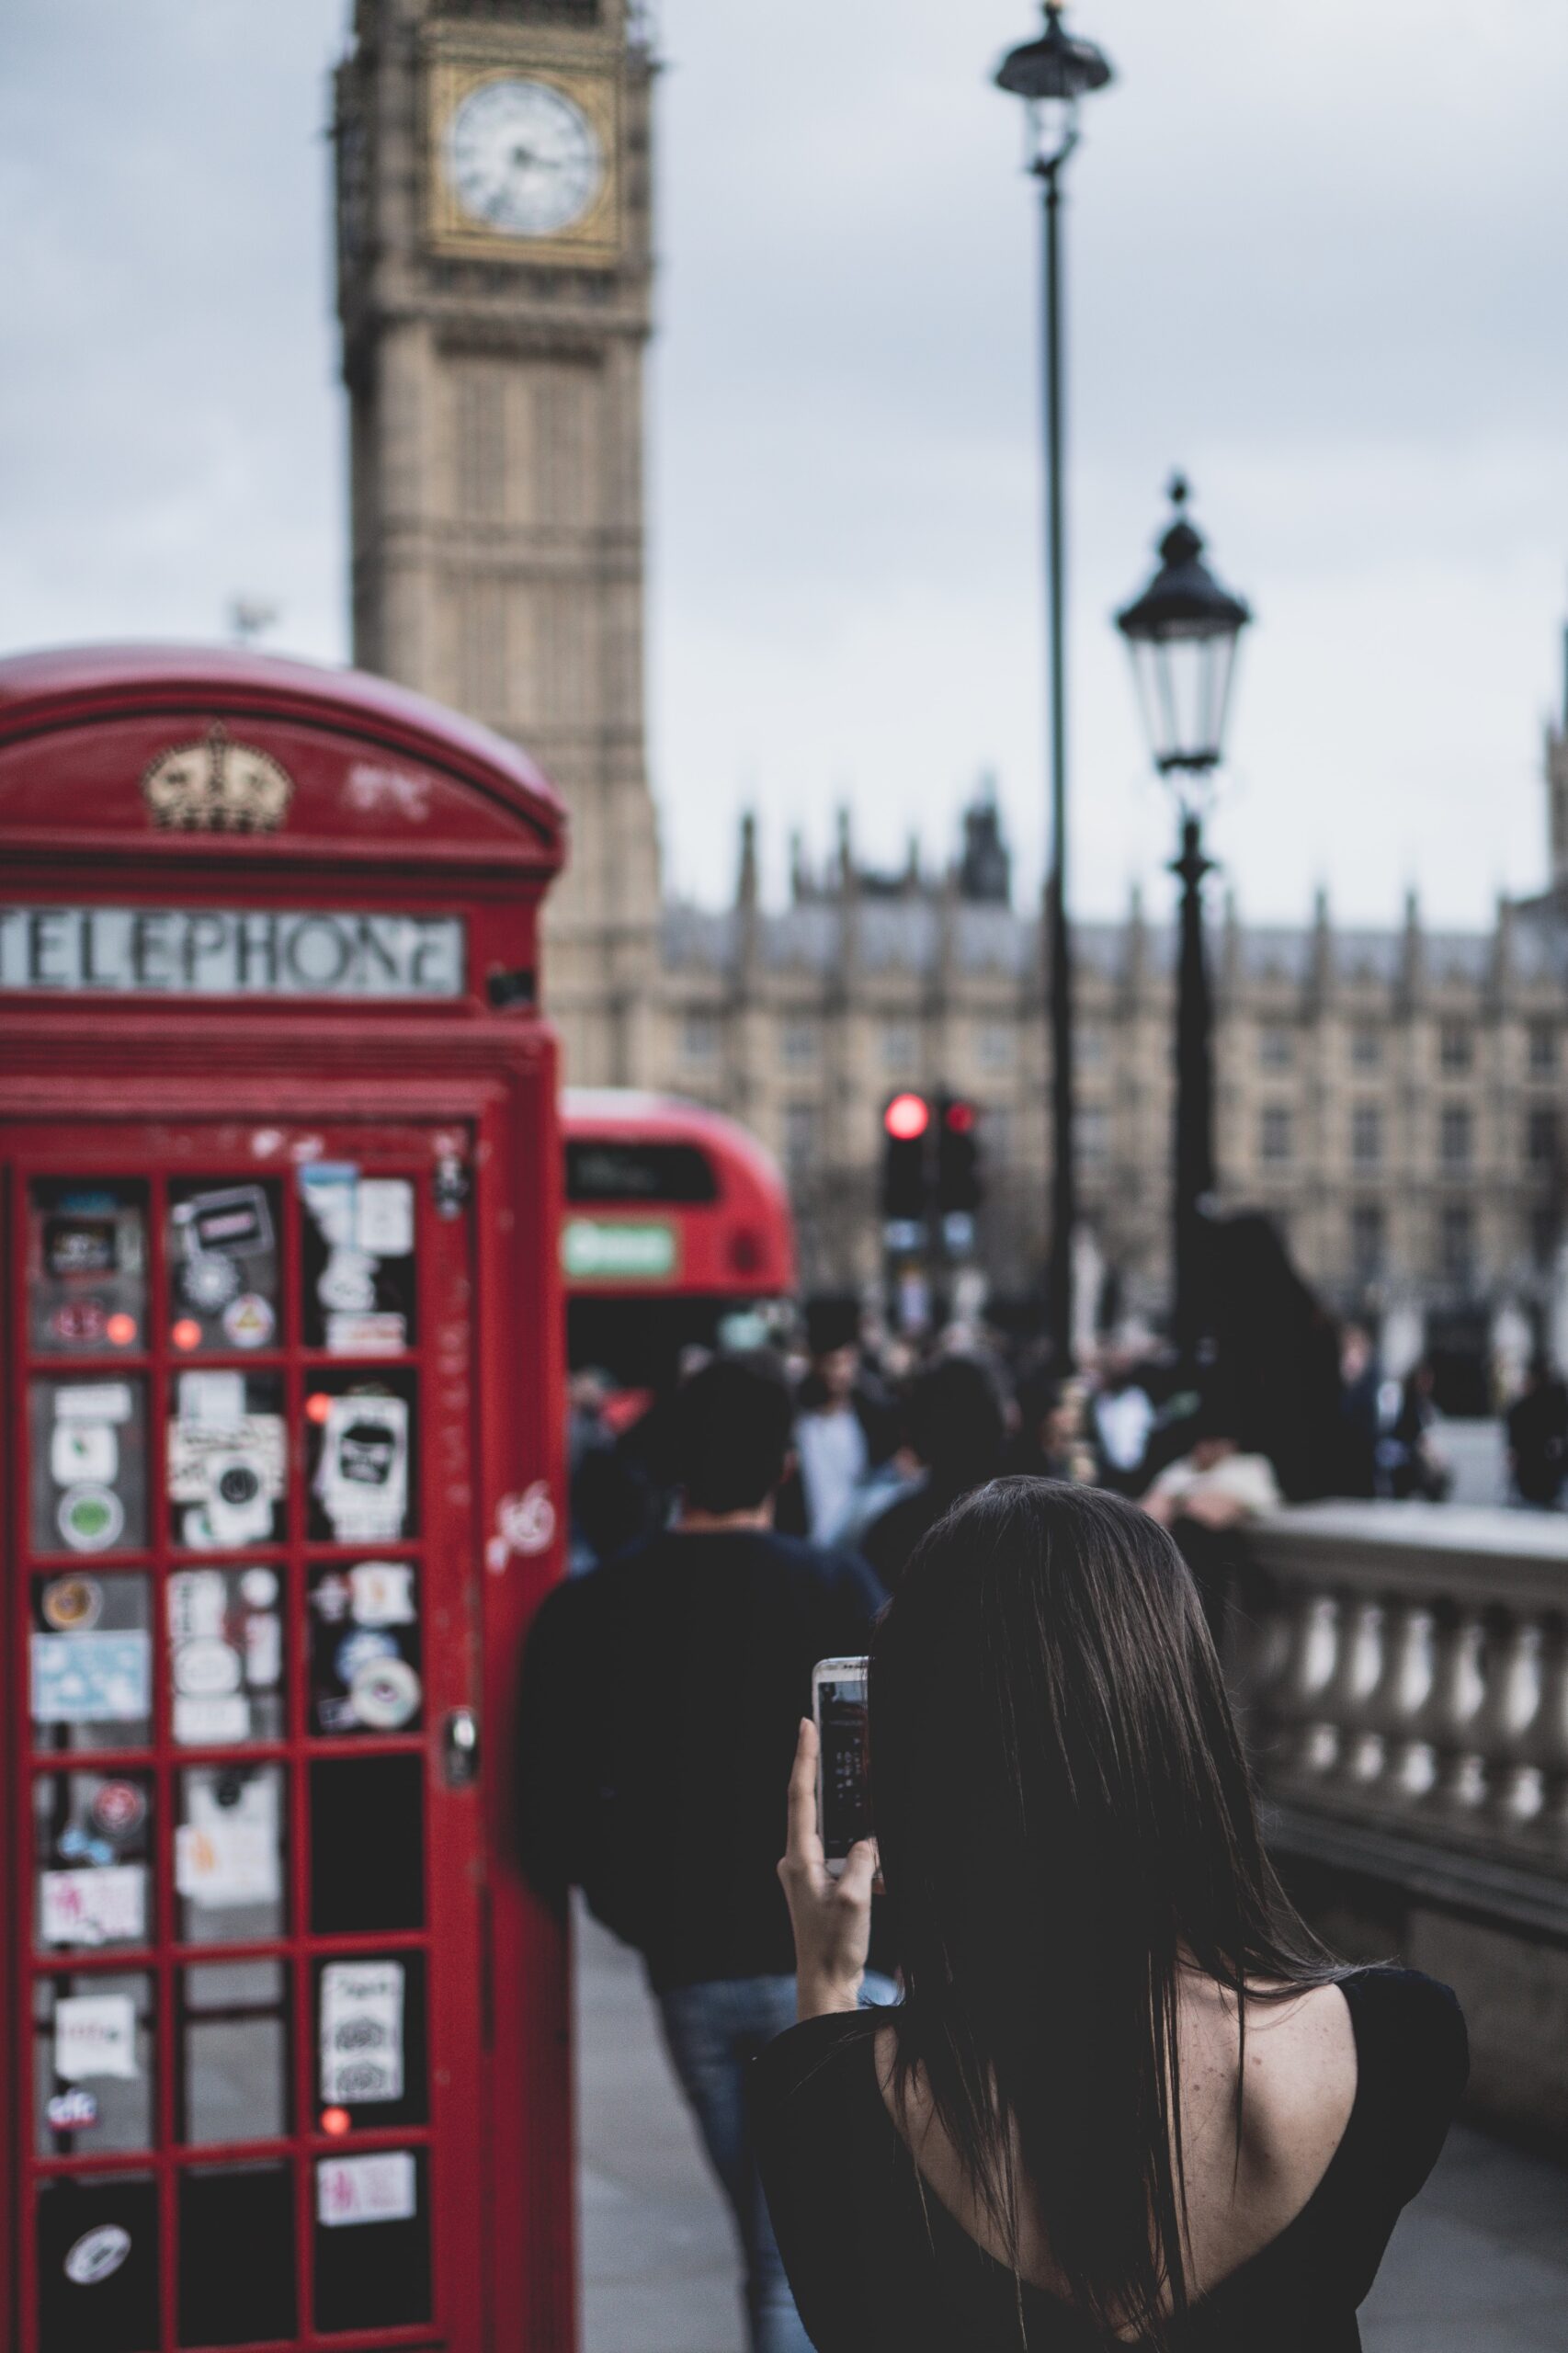 West End London by Paul Gilmore from Unsplash